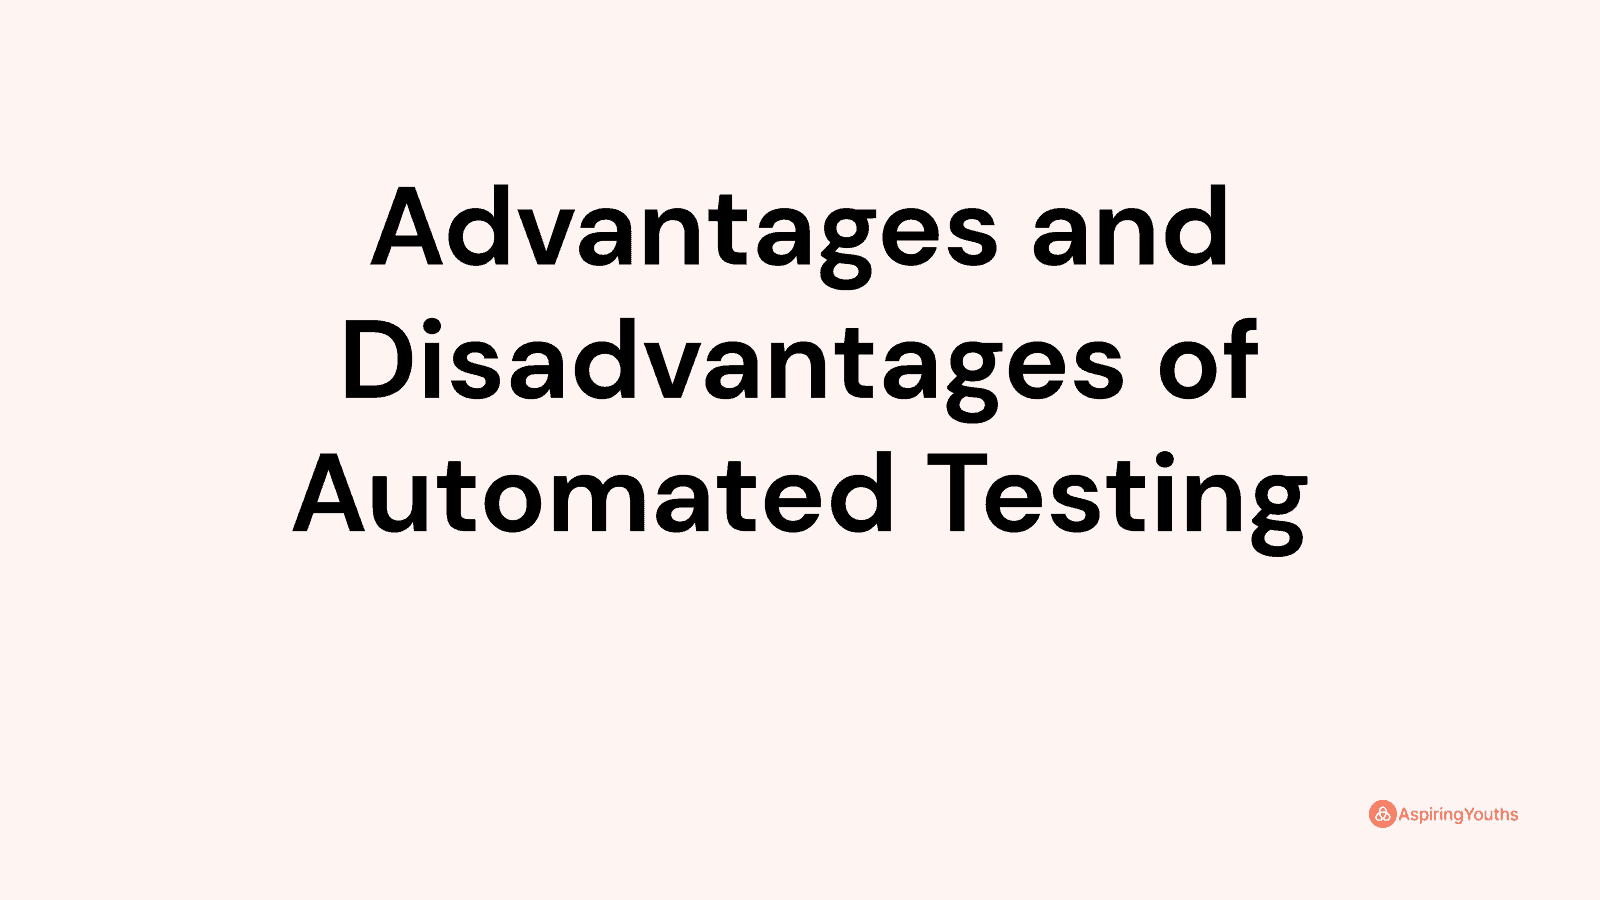 Advantages and disadvantages of Automated Testing